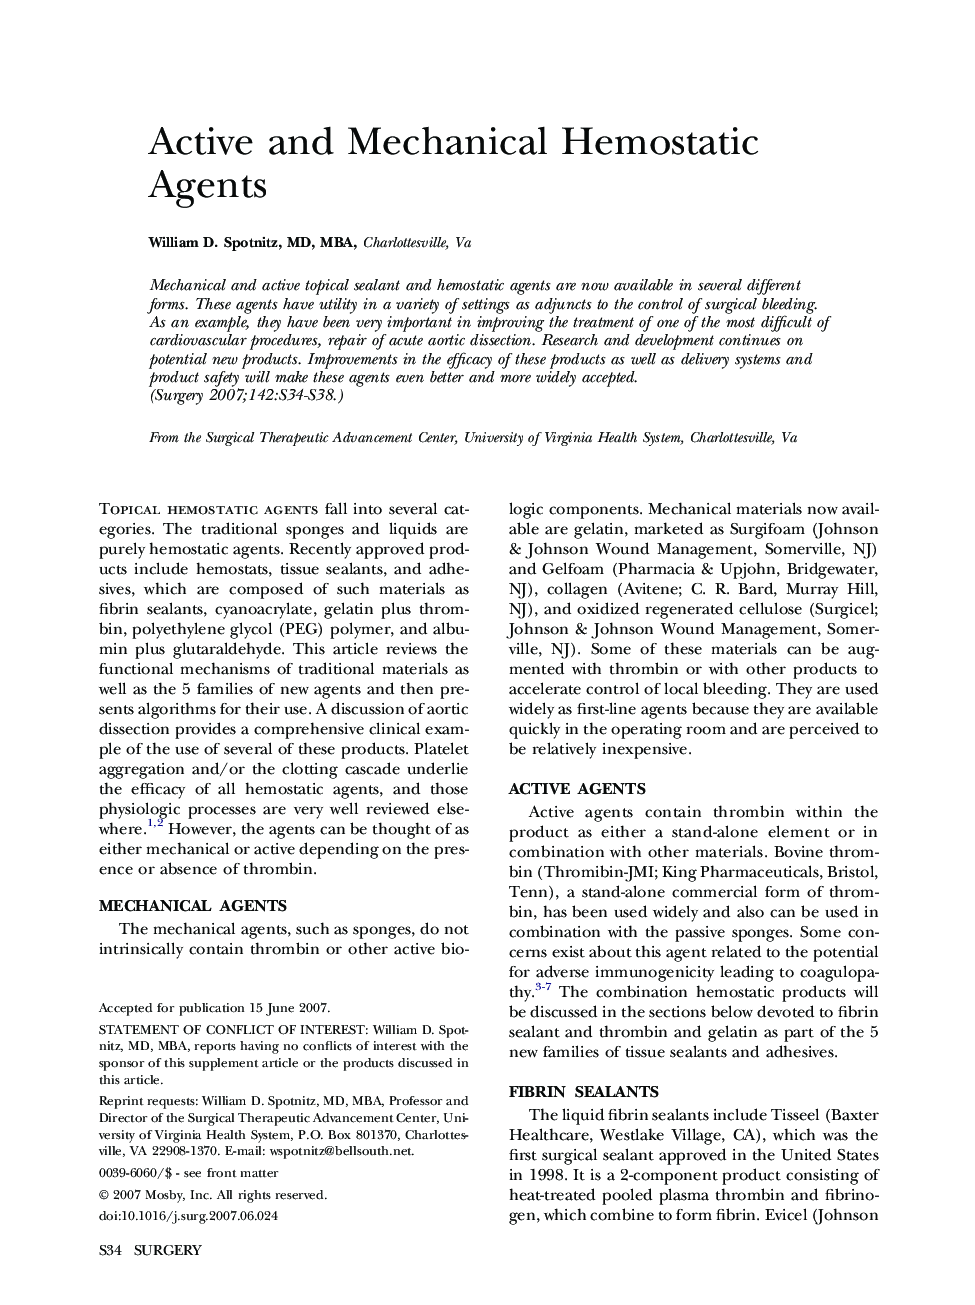 Active and Mechanical Hemostatic Agents 